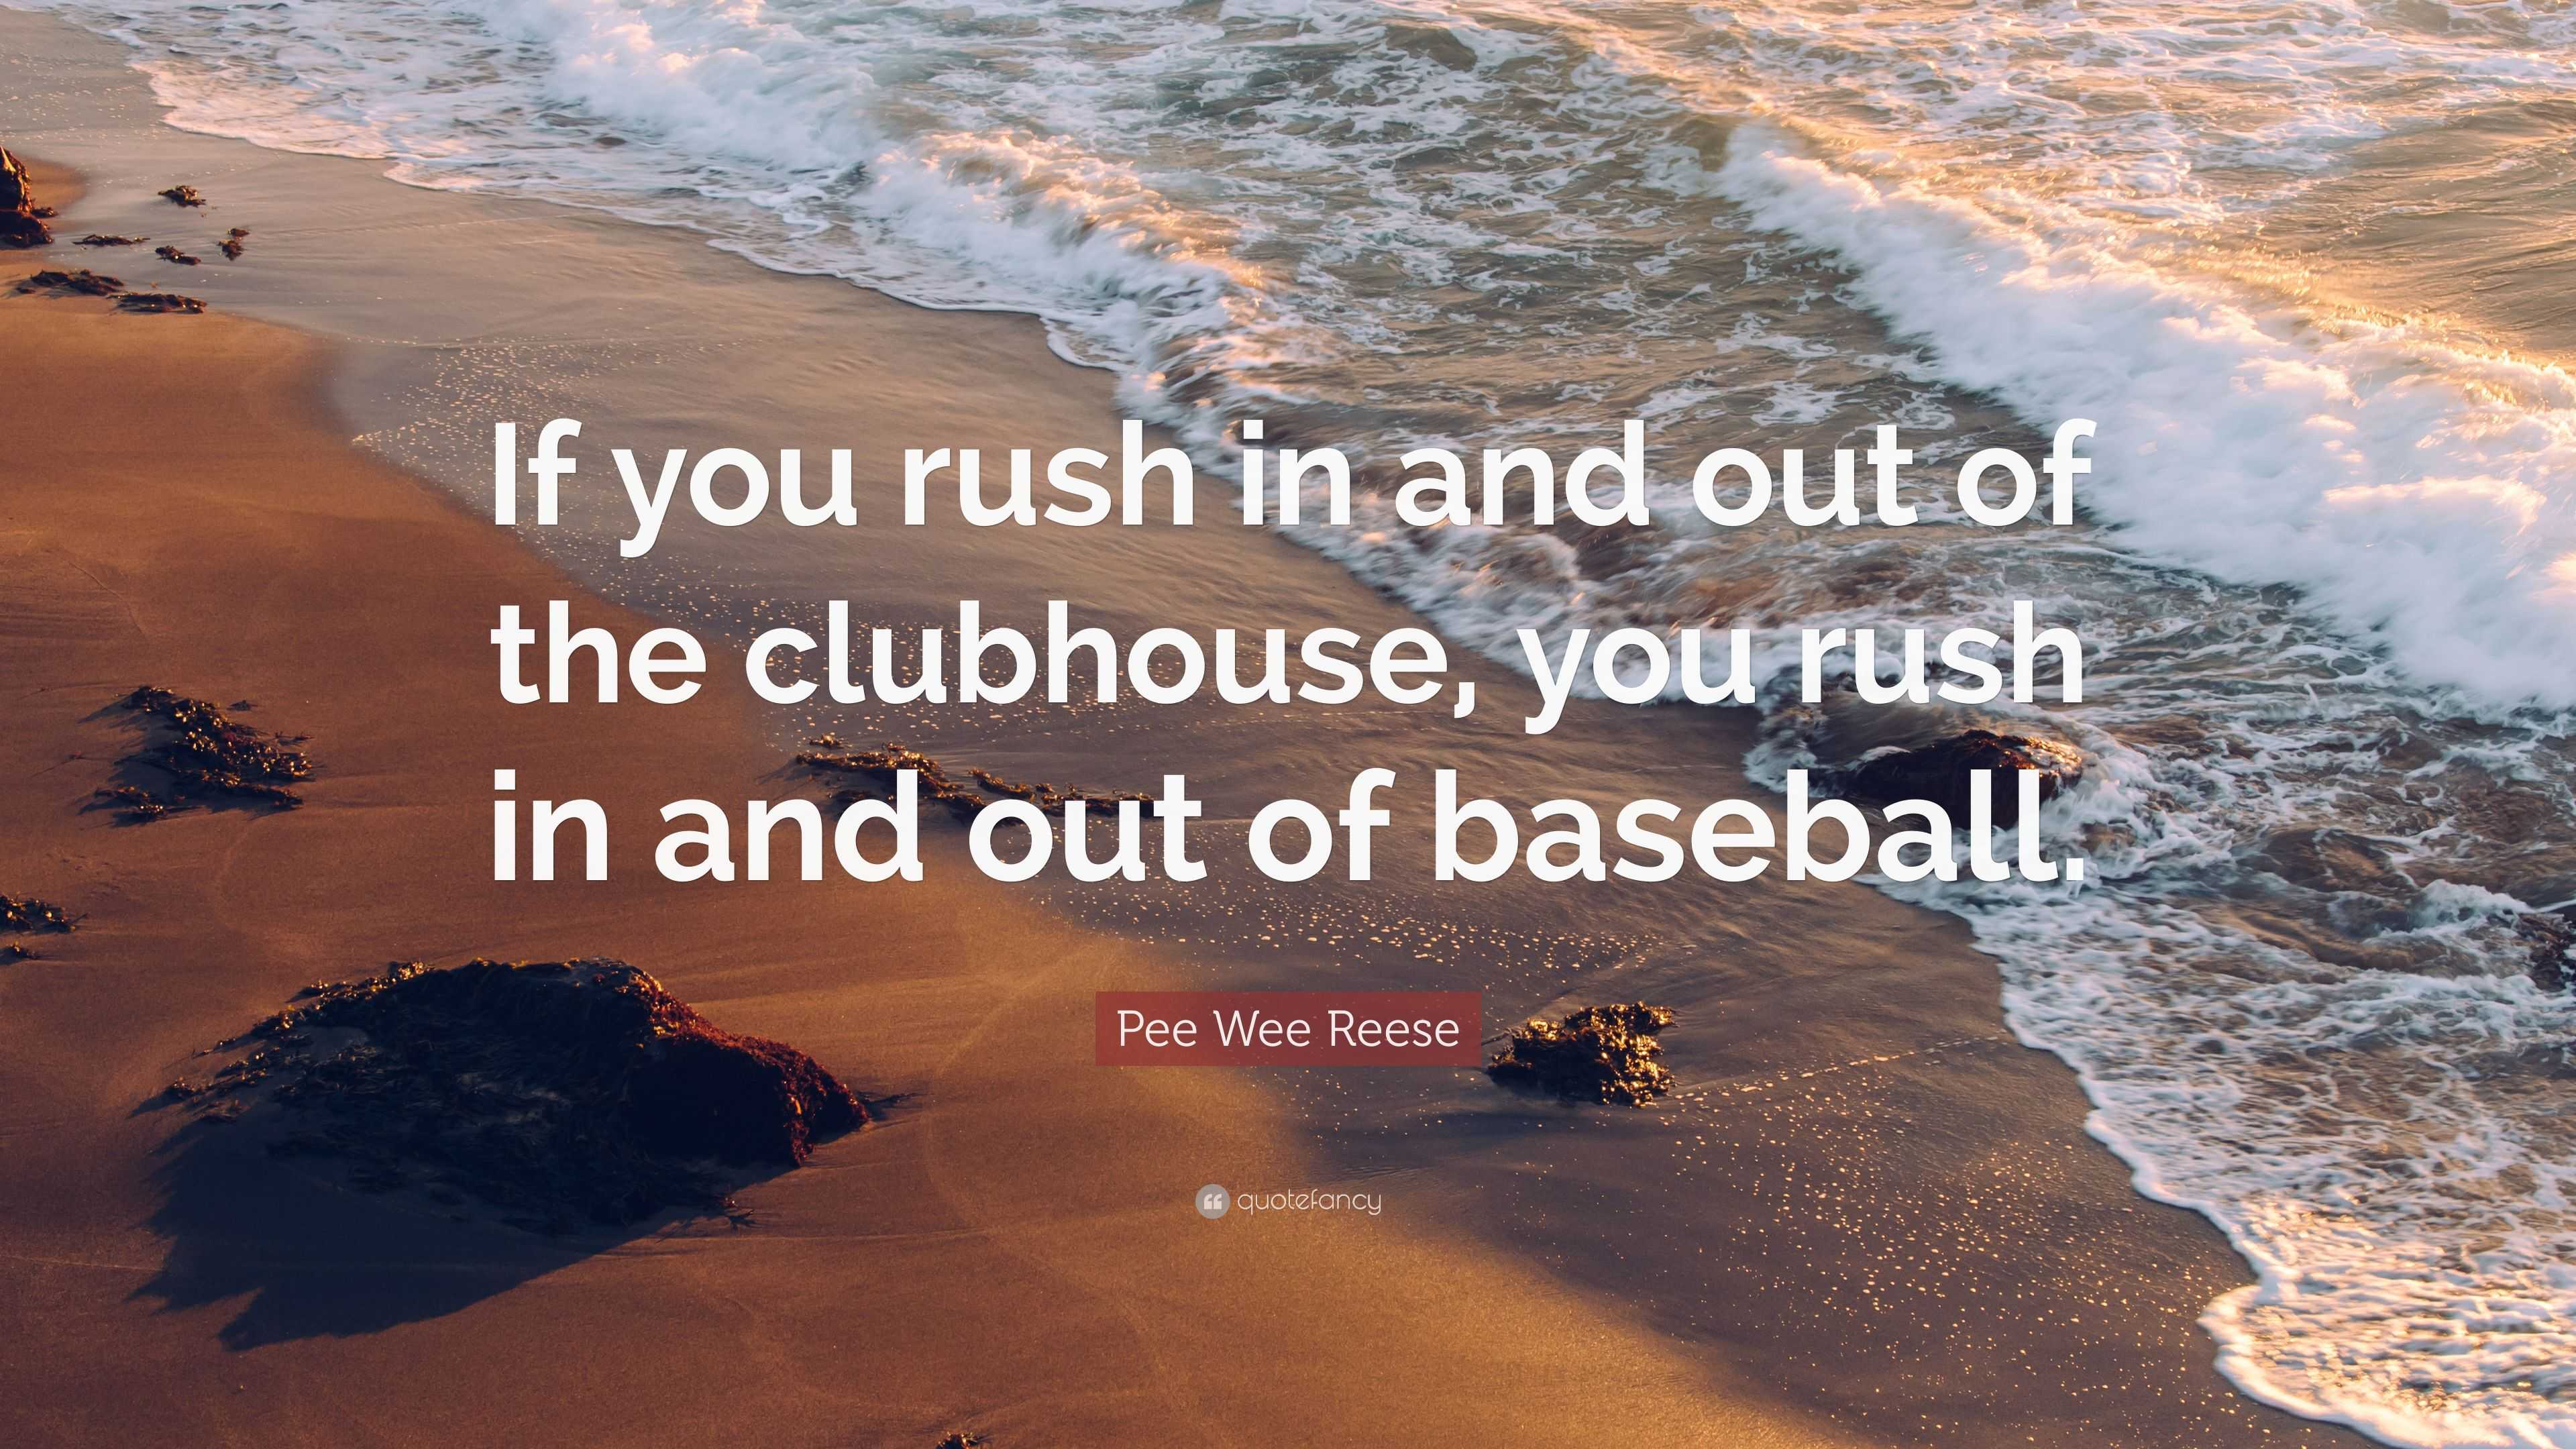 TOP 13 QUOTES BY PEE WEE REESE